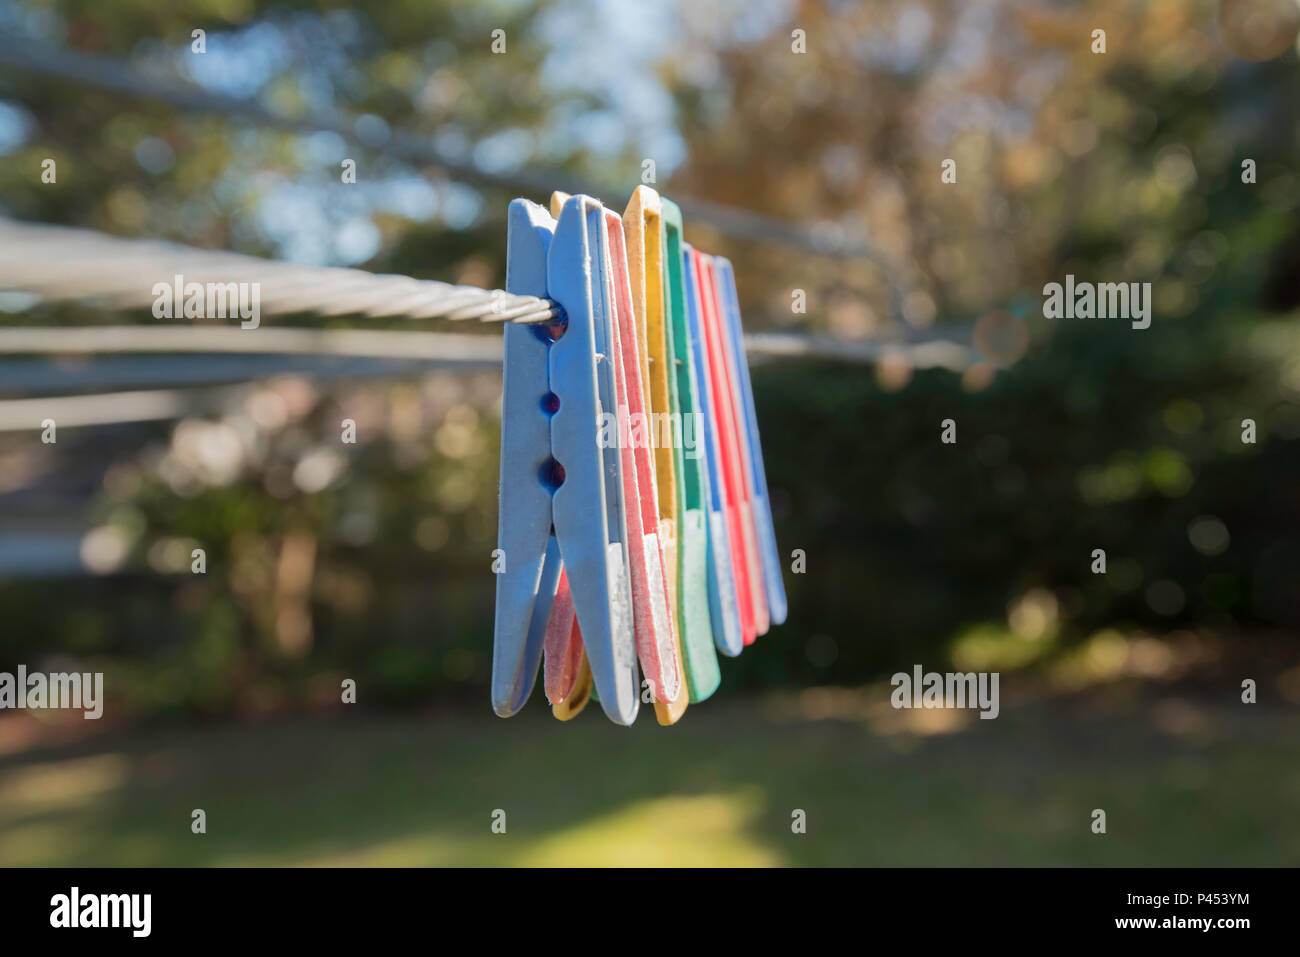 A row of colourful clothes pegs on a Hills Hoist clothes line in an Australian backyard Stock Photo